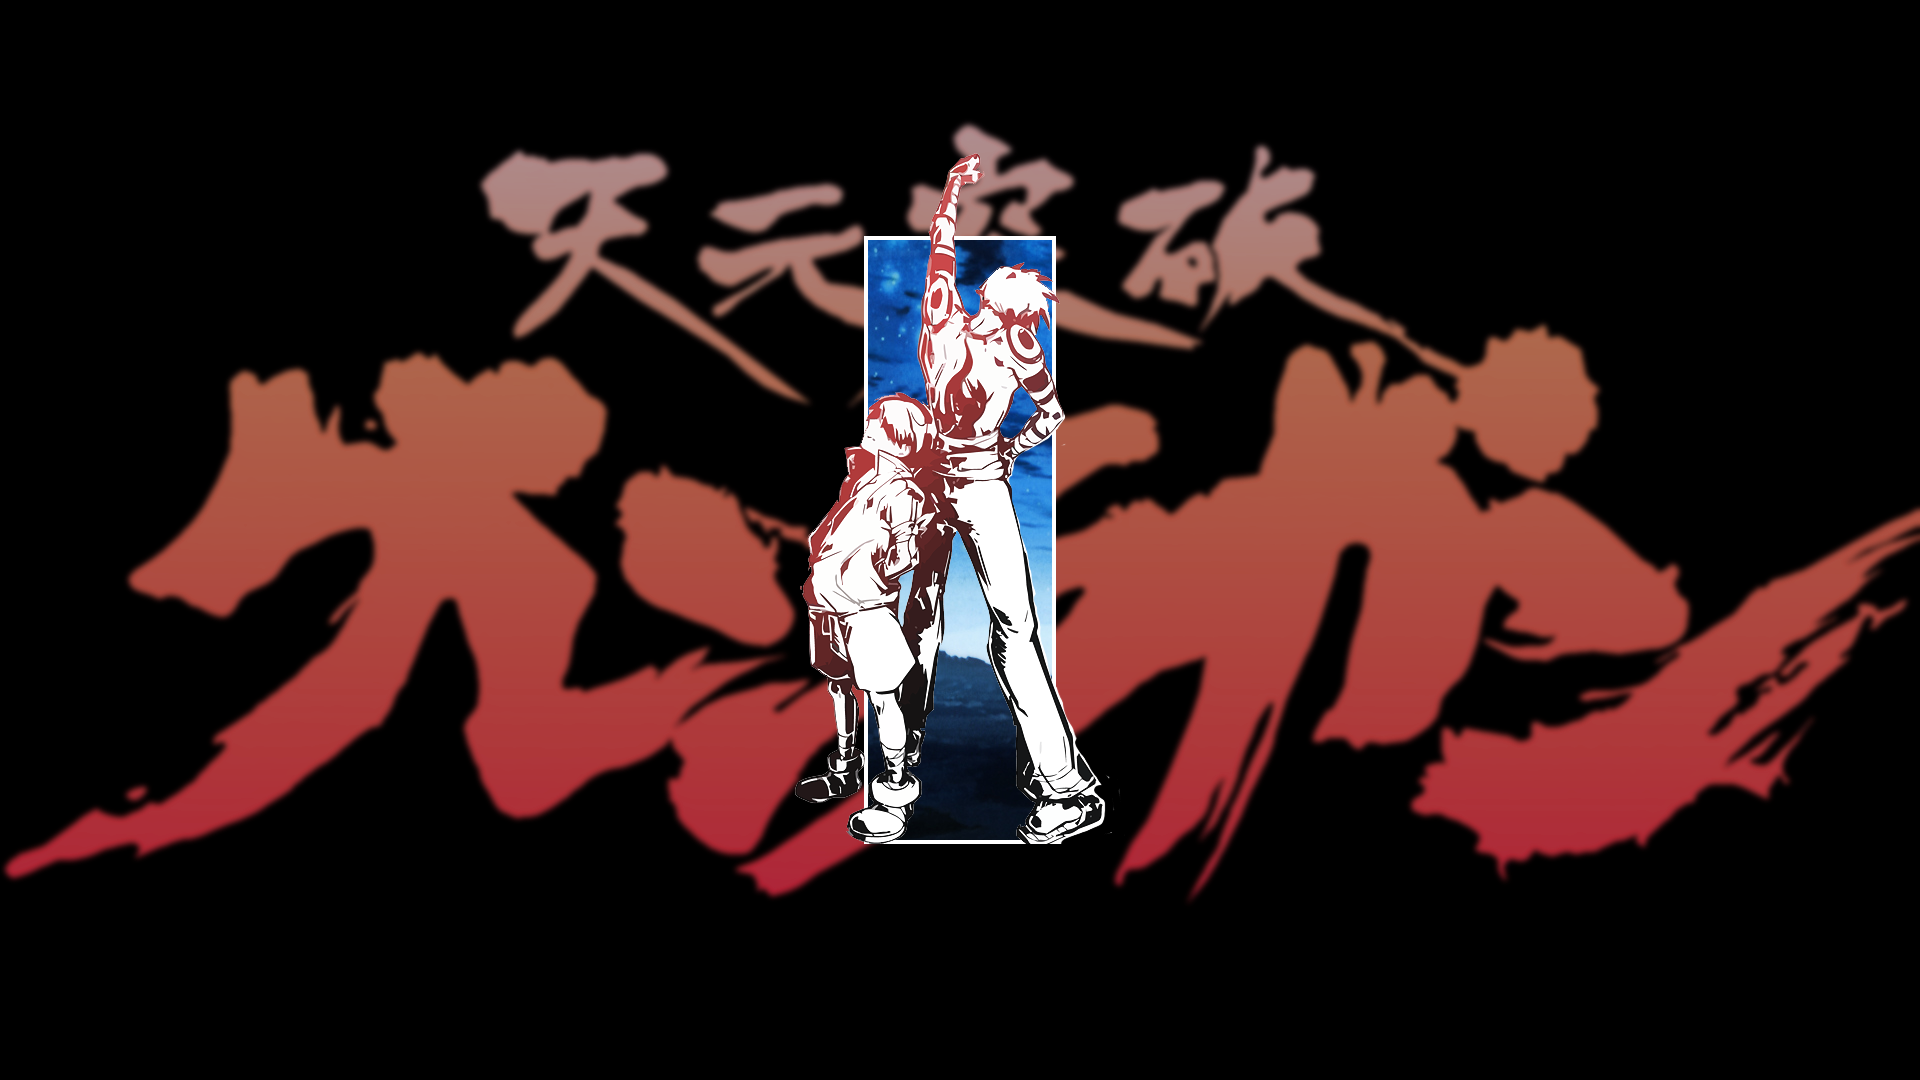 Tengen Toppa Gurren Lagann Kamina Picture In Picture Piture In Picture 1920x1080